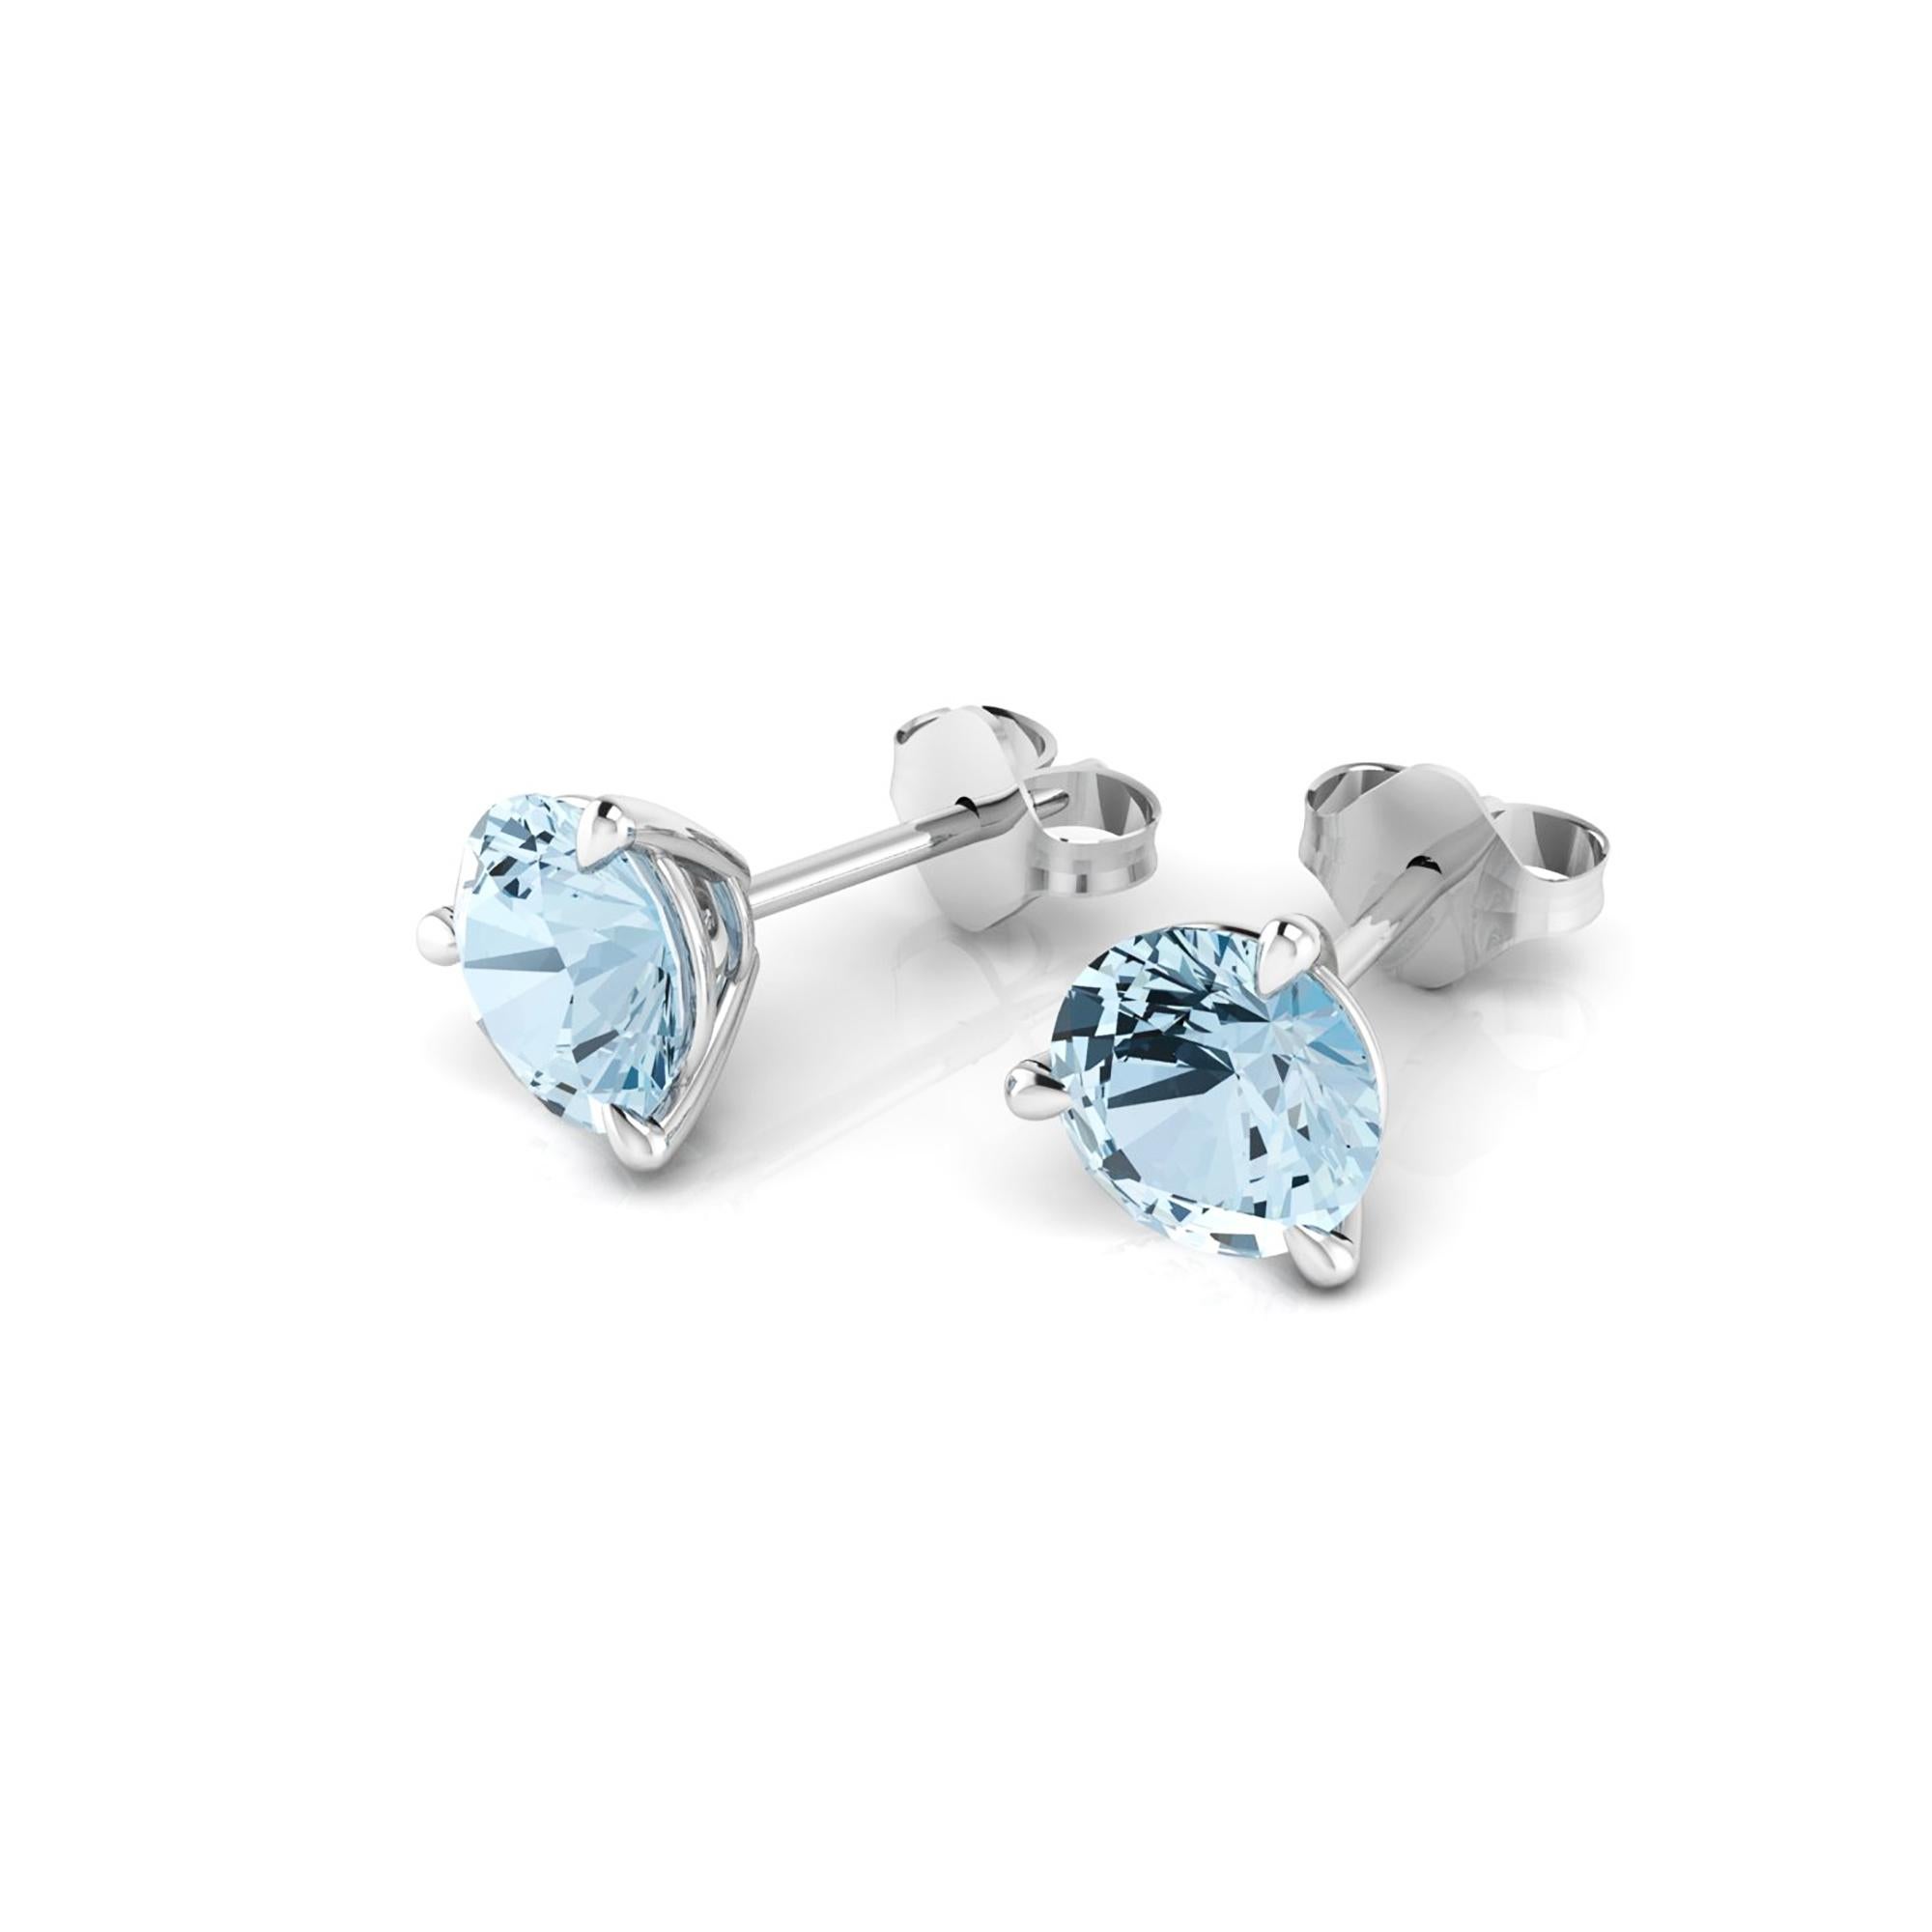 2.30 carat Aquamarine Martini ear-studs, hand made in 18k white gold in New York City with the best Italian craftsmanship,

Perfect gift for any woman and every age, easy to wear from the office to a special evening out.

